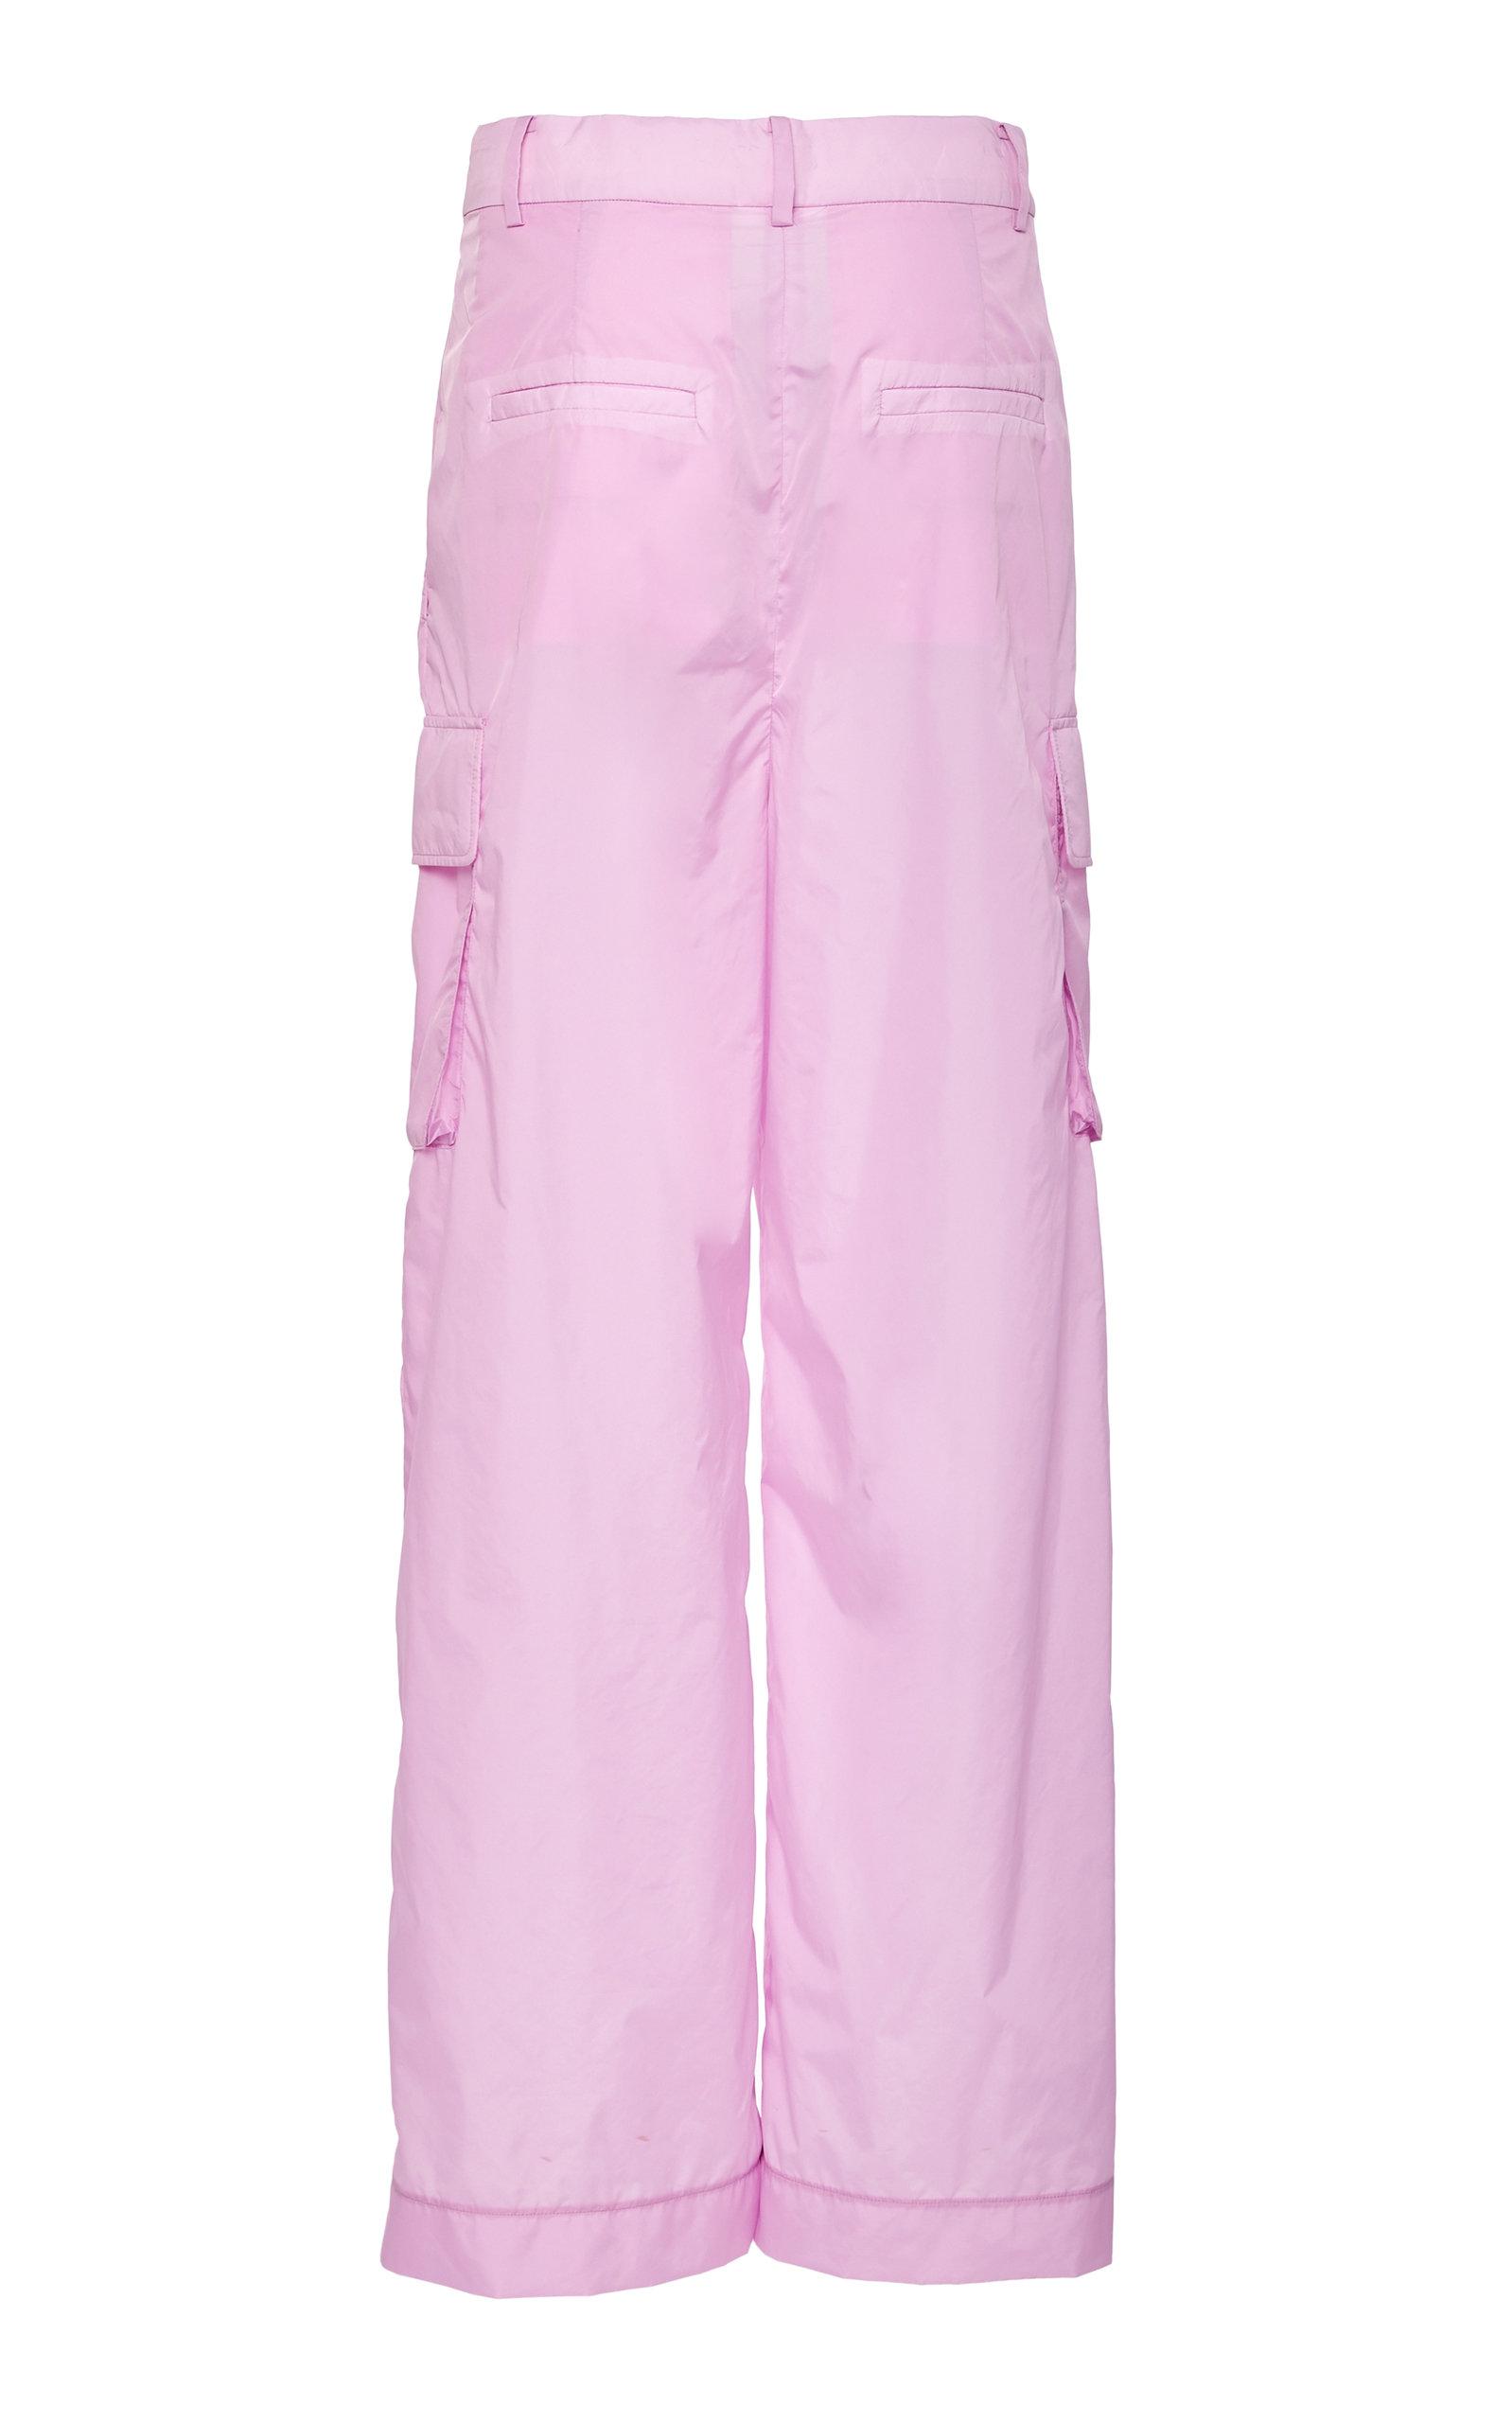 Tibi Synthetic Nylon Pleated Cargo Pant in Pink - Lyst